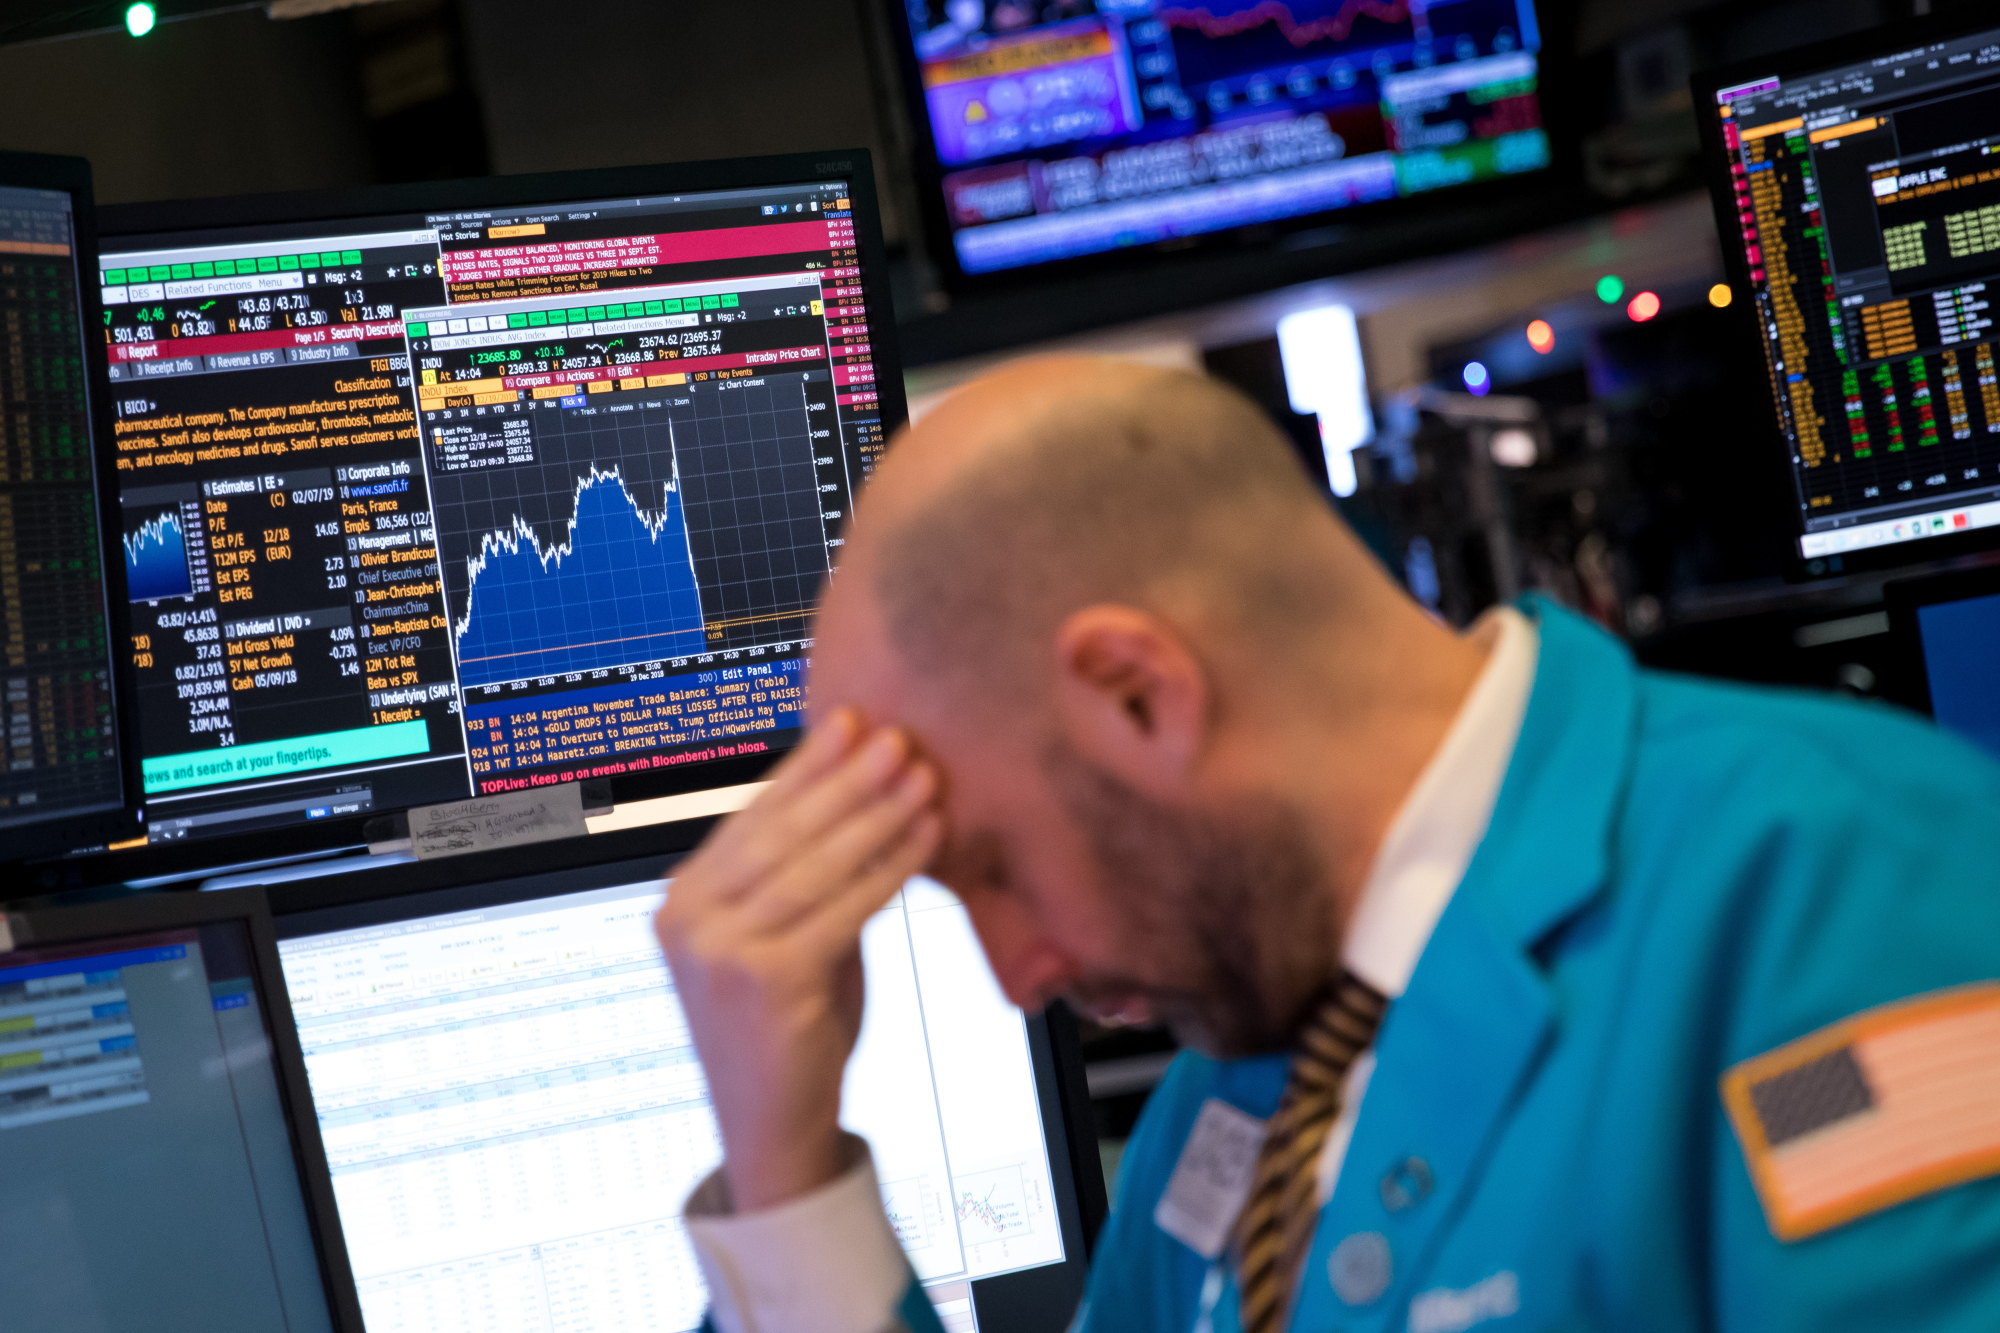 A trader works on the floor of the New York Stock Exchange on Dec. 19 as U.S. stocks careened to a 15-month low amid worries over the Federal Reserve's monetary policy. | BLOOMBERG